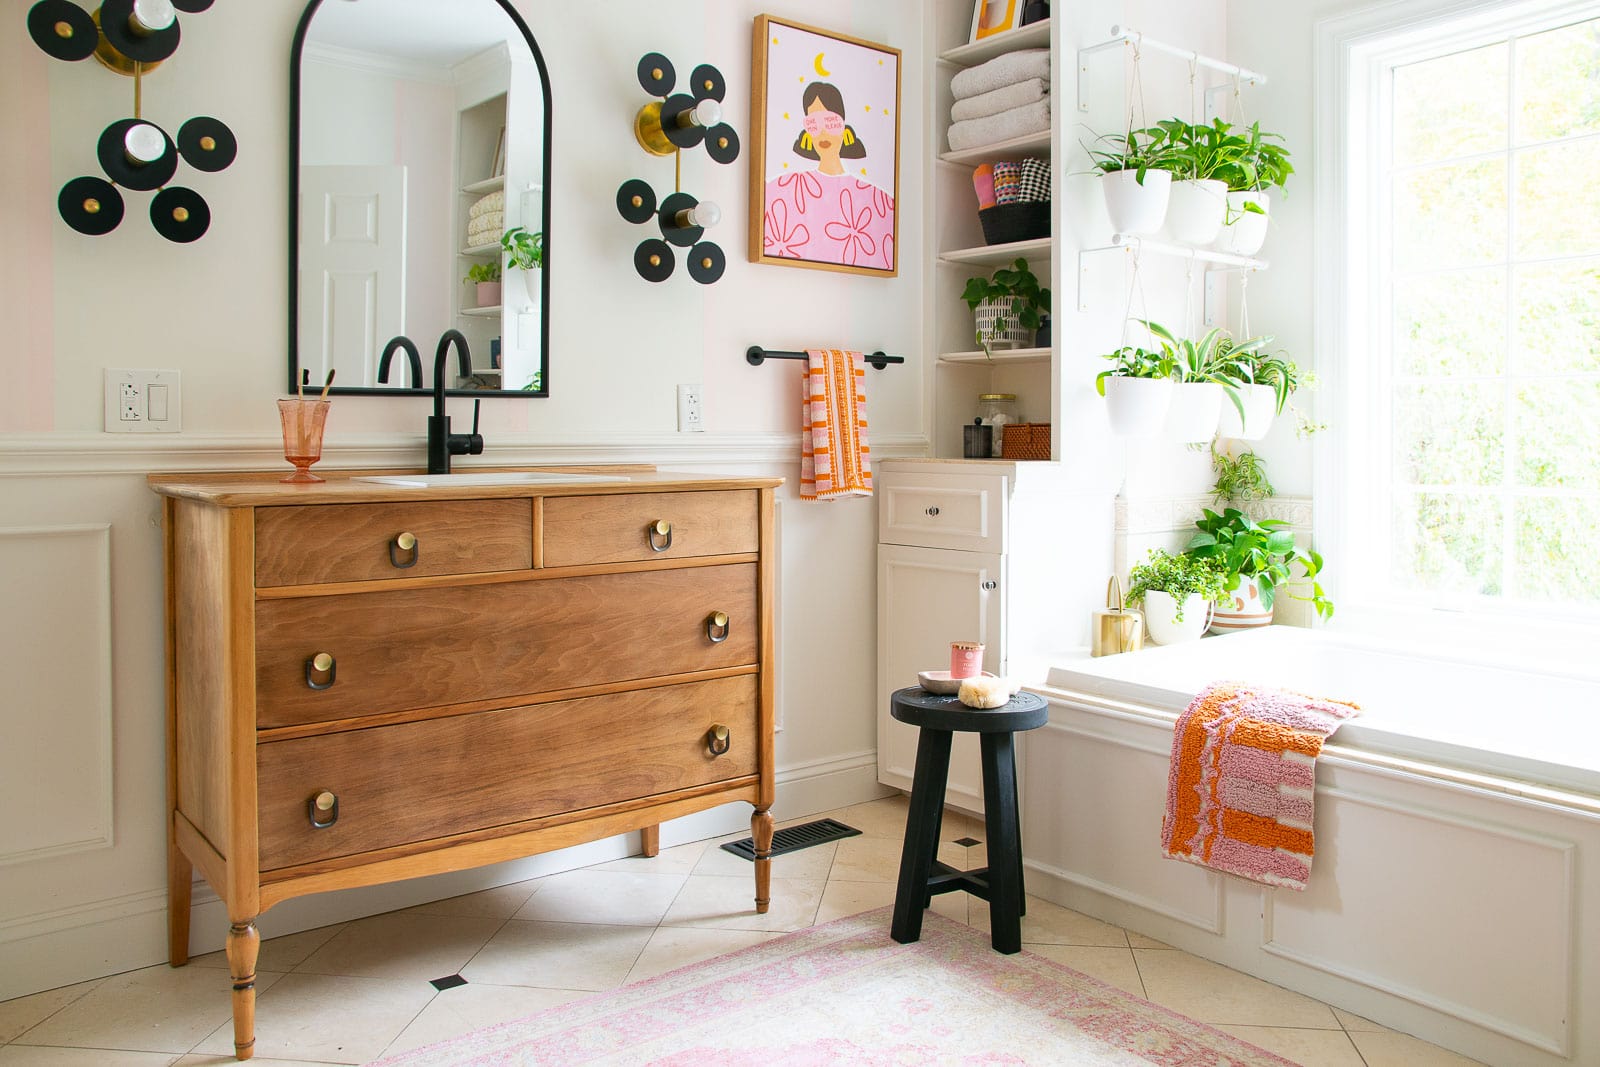 How to Turn a Vintage Dresser into a Bathroom Vanity